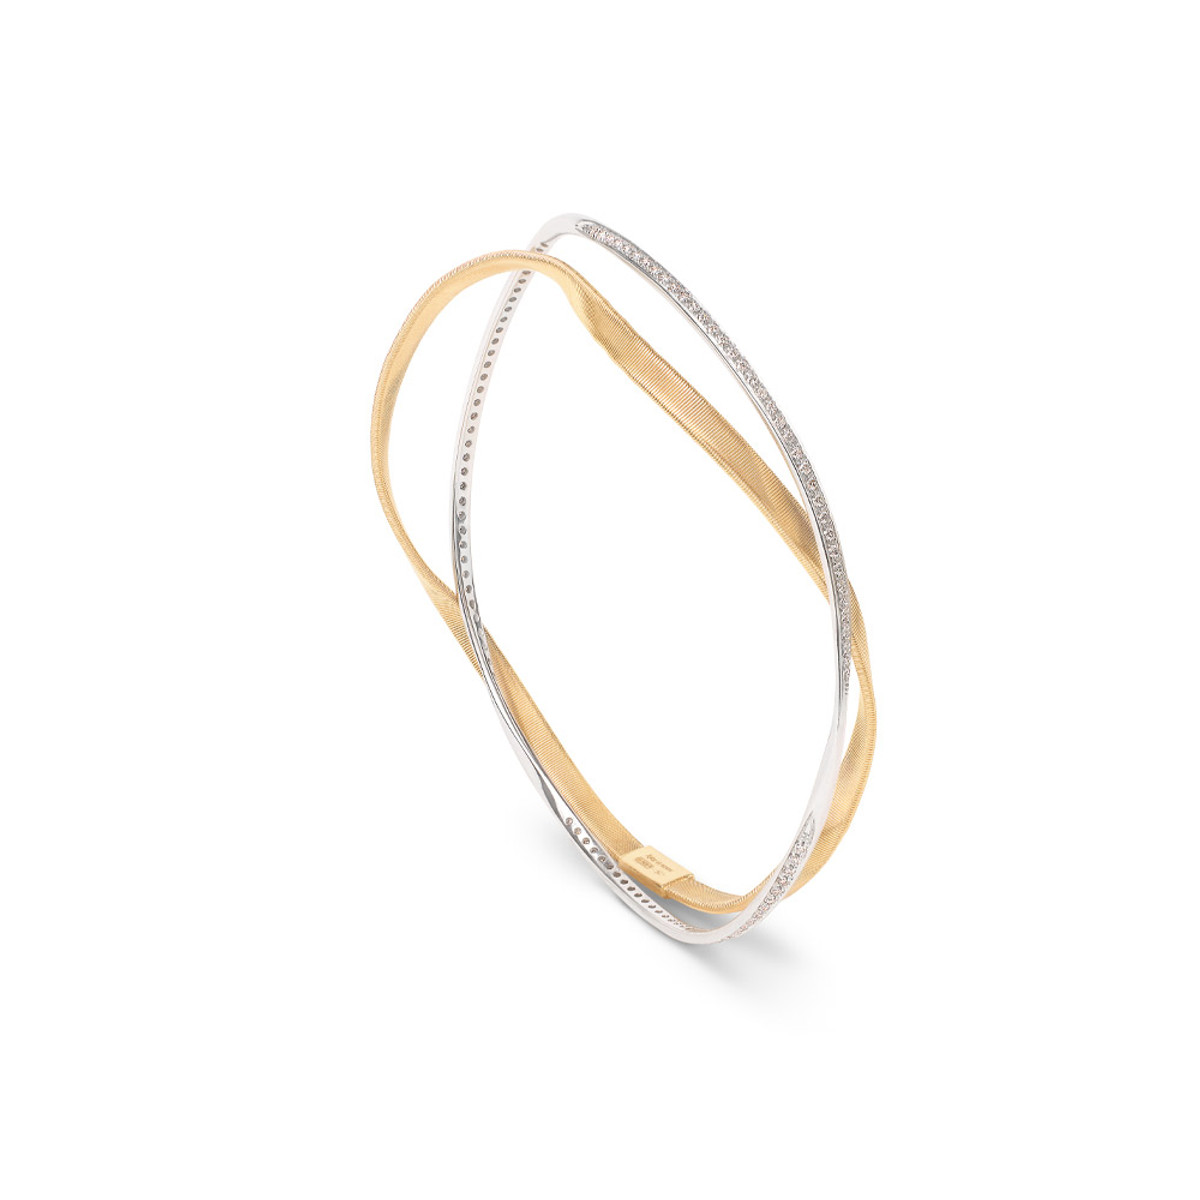 Marco Bicego Marrakech Collection 18K Yellow Gold 2 Row Diamond Hand Twisted Bangle-54252 Product Image